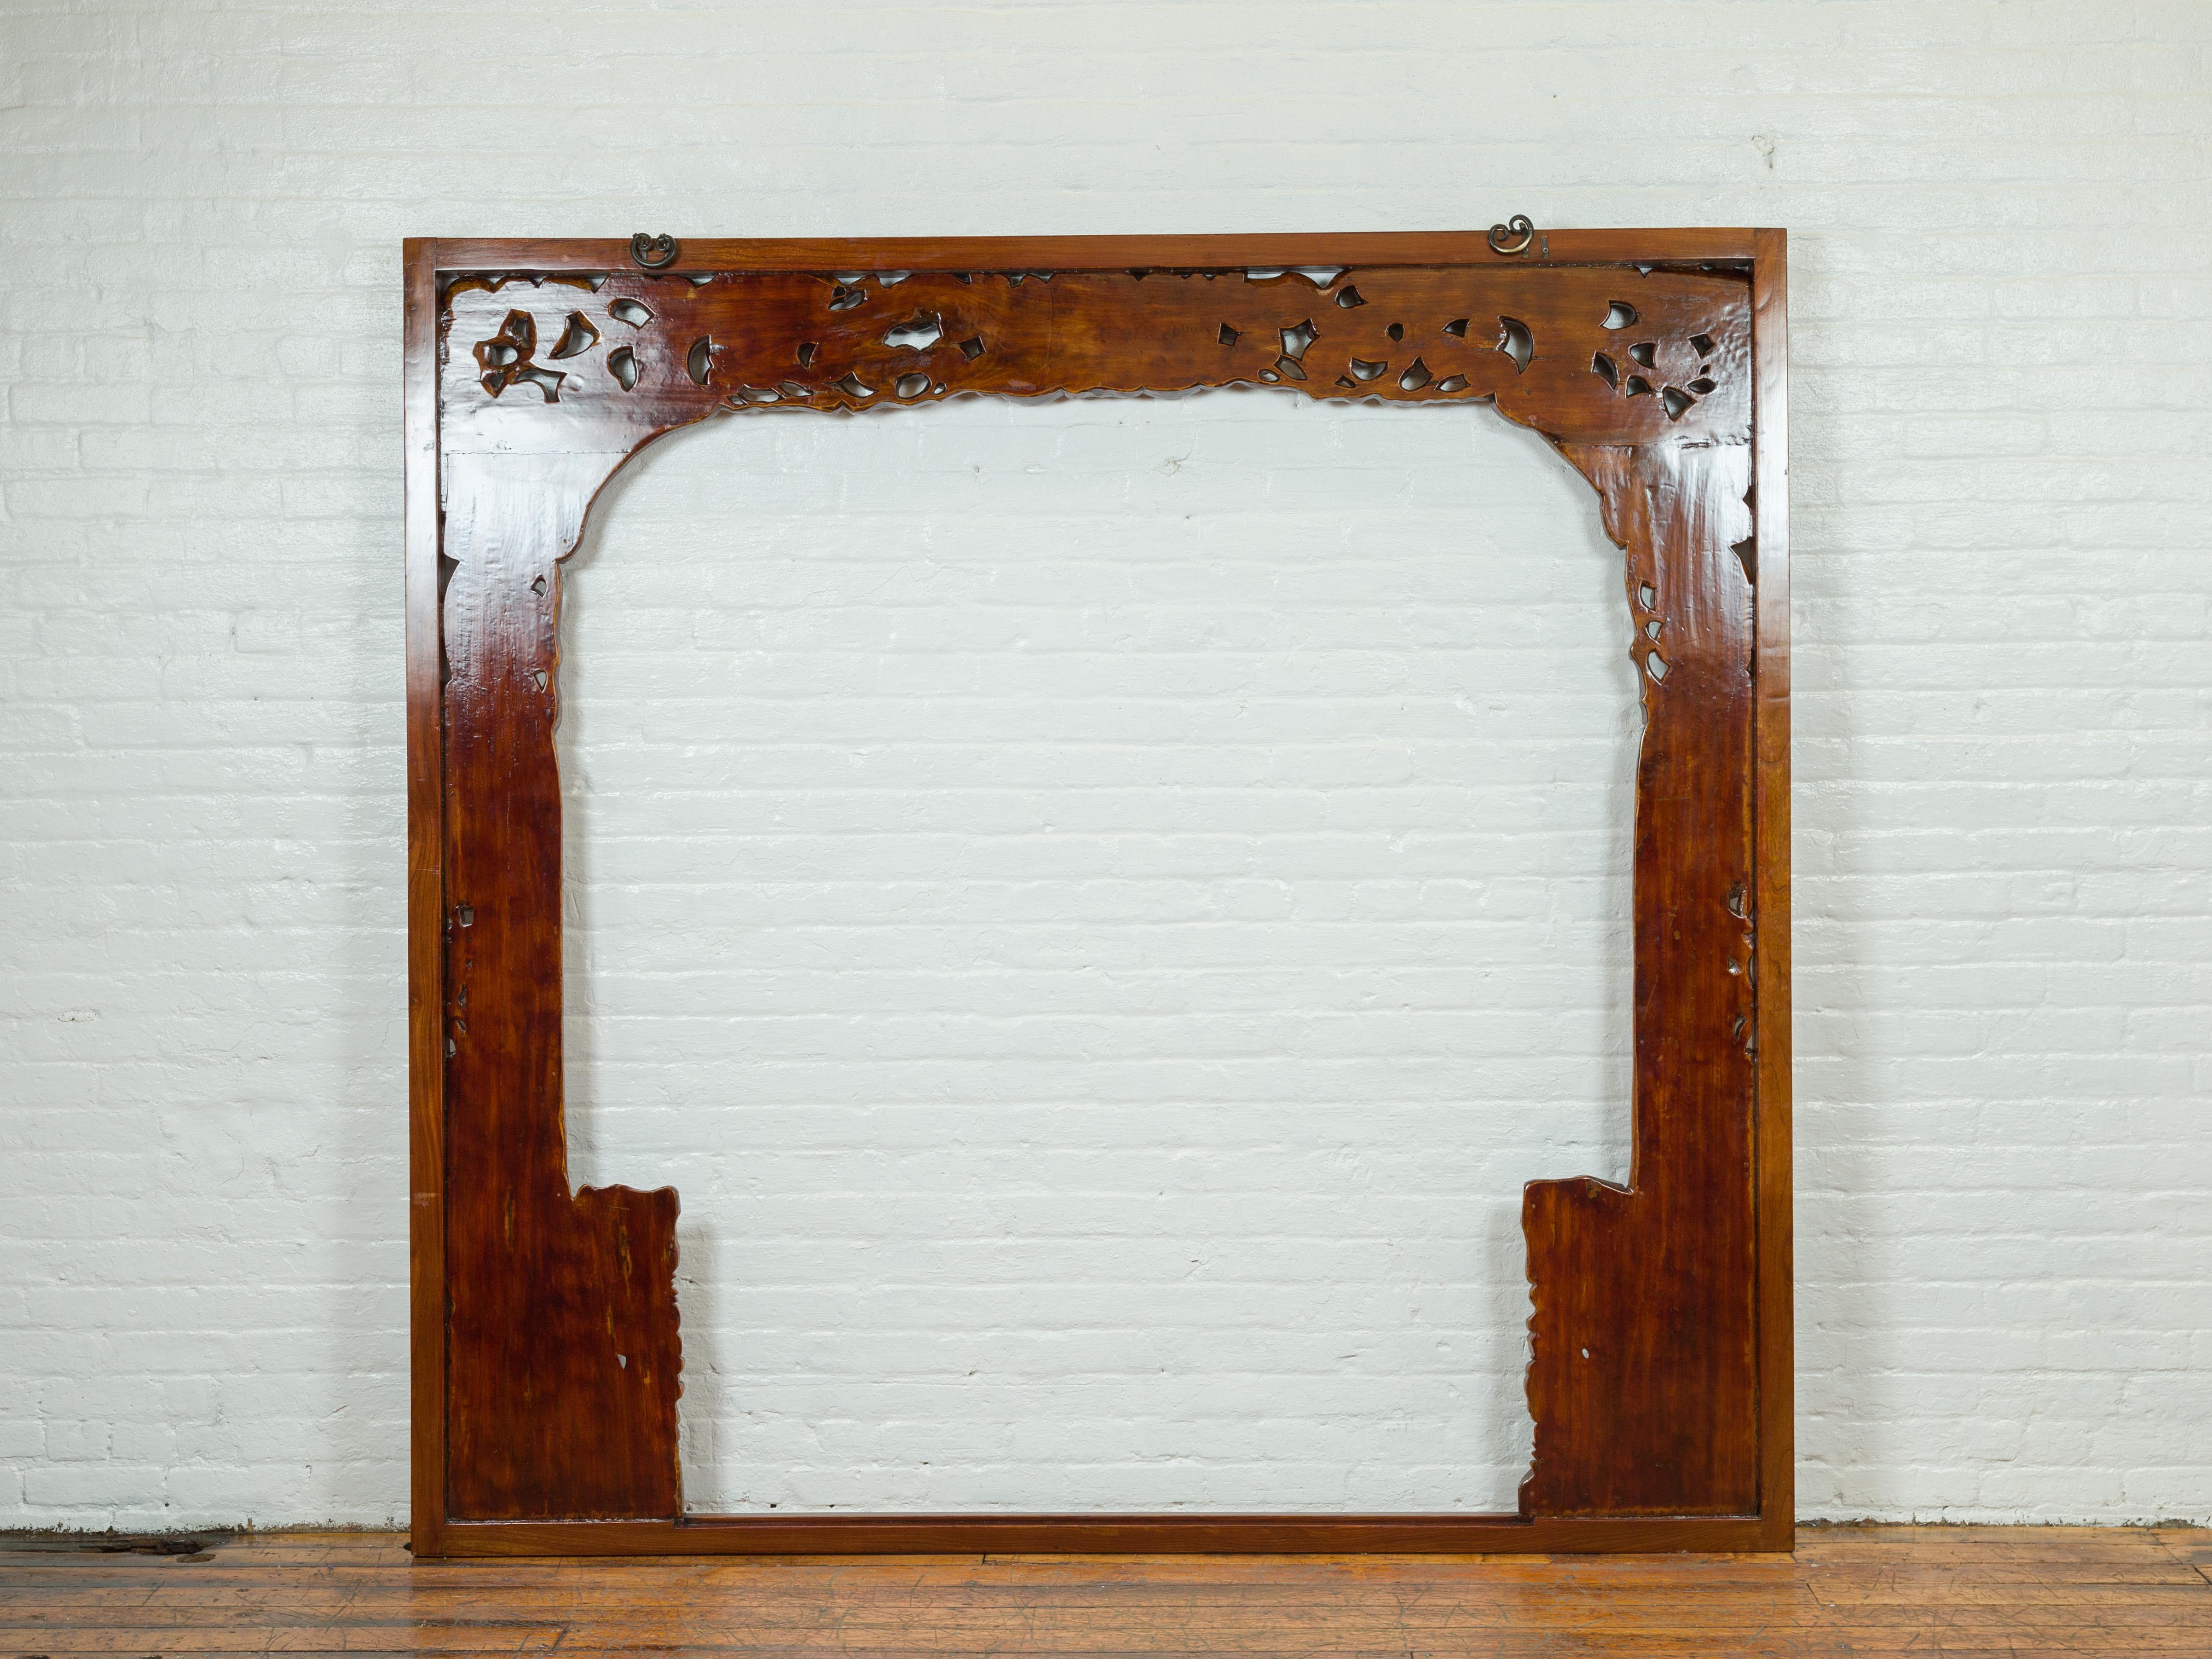 Oversized 19th Century Carved Wooden Frame with Birds, Foliage and Tree Limbs For Sale 5